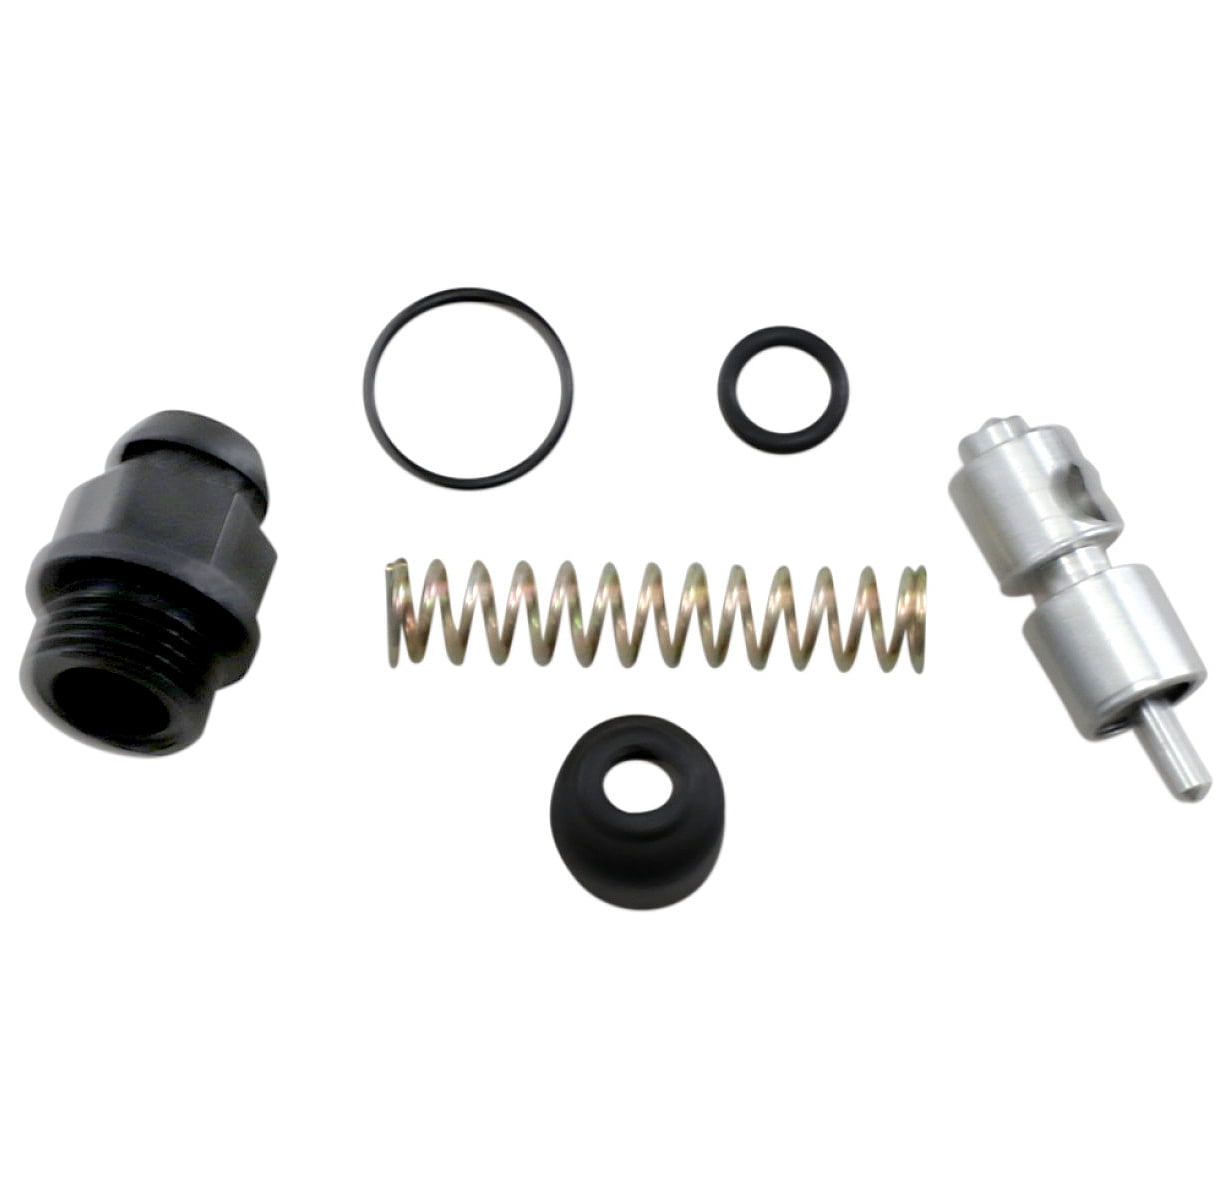 Choke Cable Plunger Rebuild Kit Replacement for Yamaha Grizzly 400 YFM400 2007 2008 